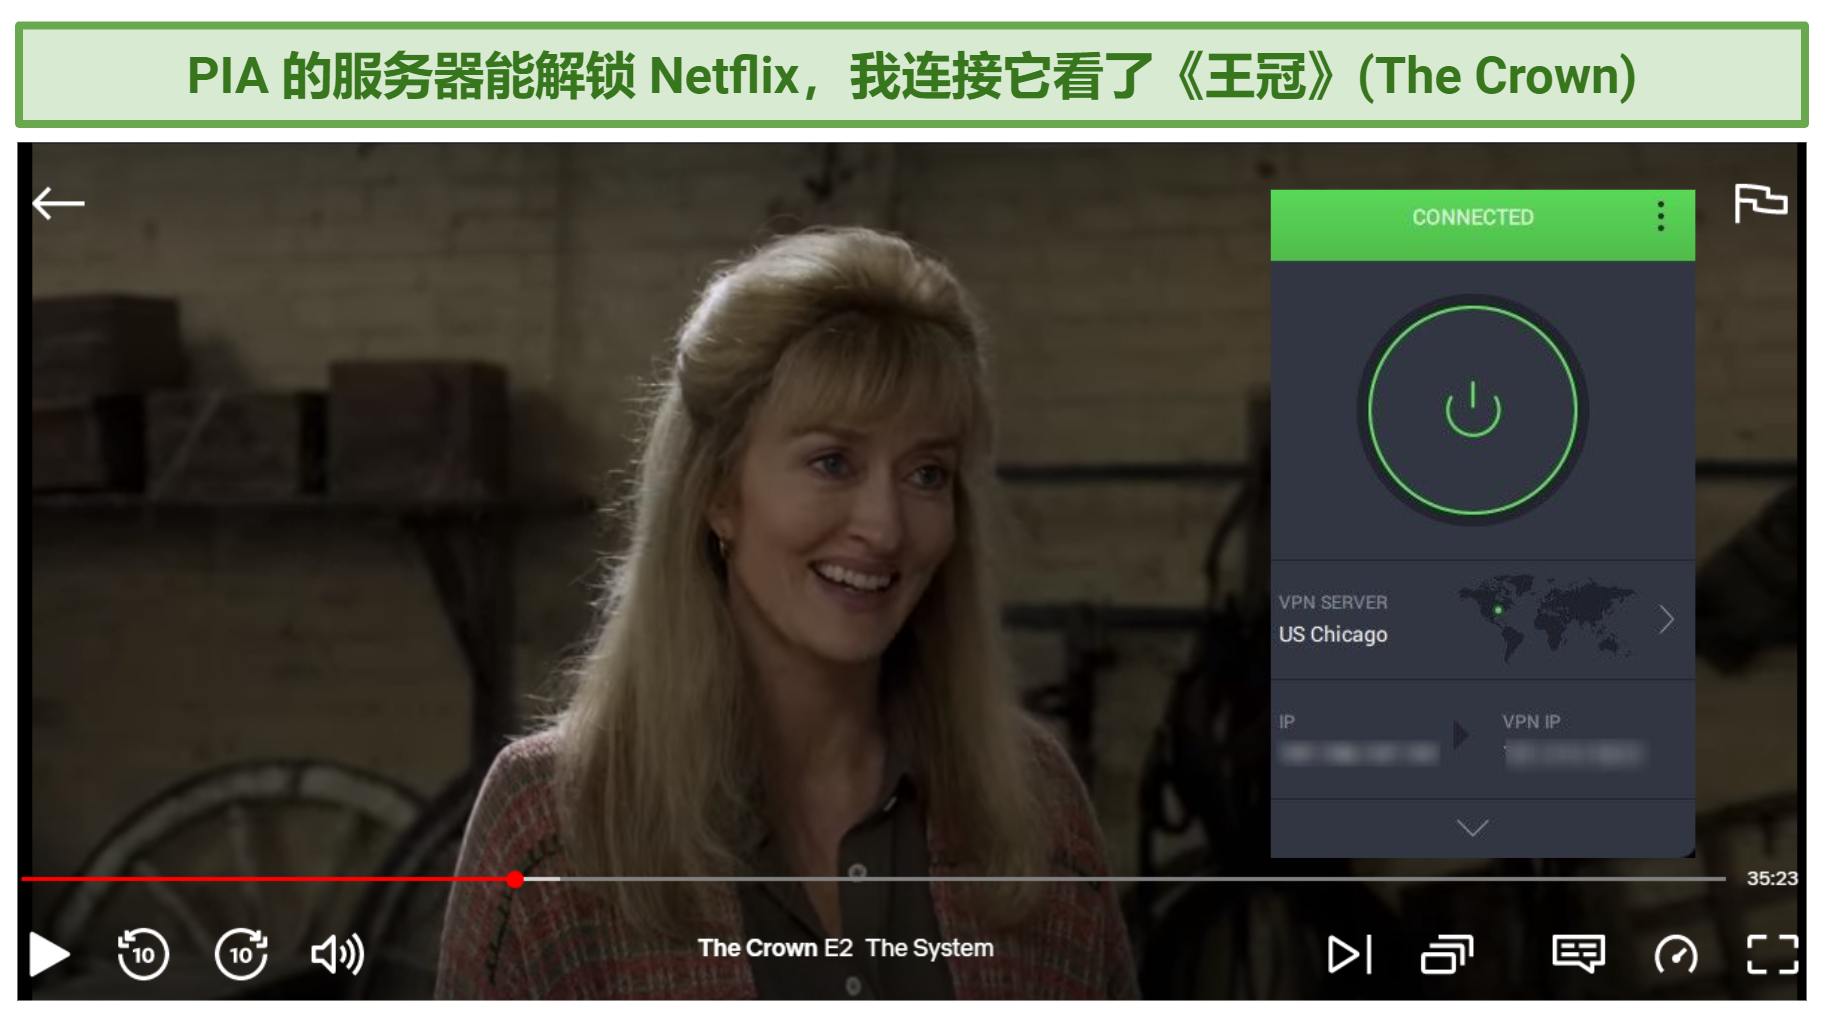 A screenshot of Netflix show accessed with PIA